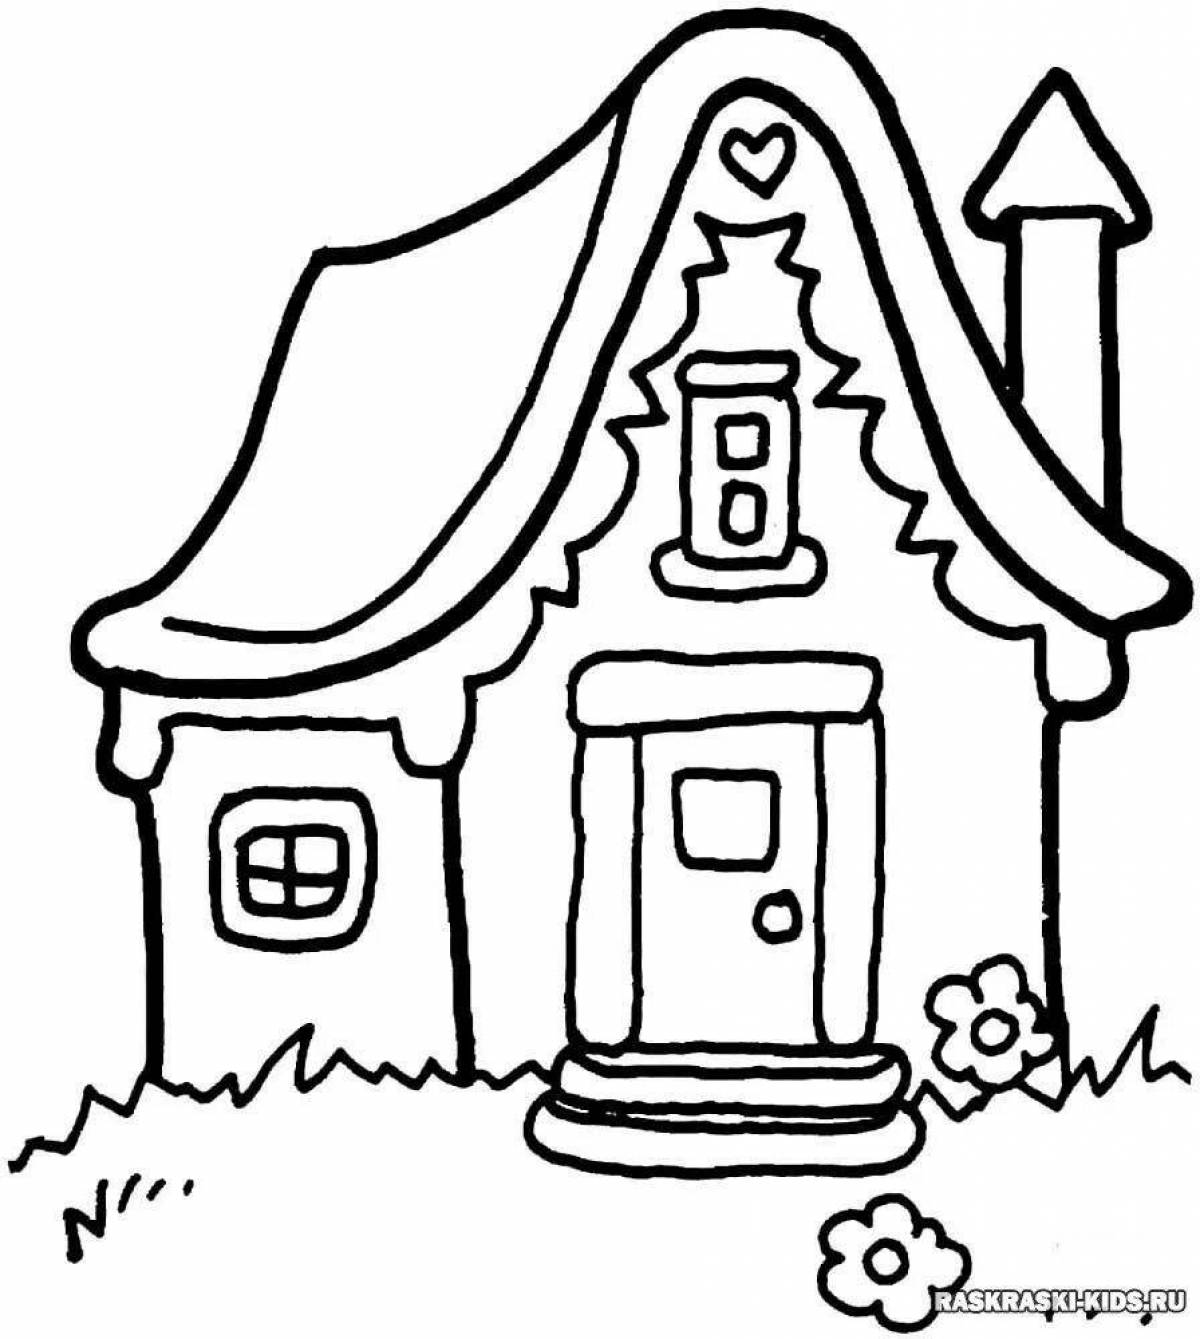 Playful house coloring book for kids